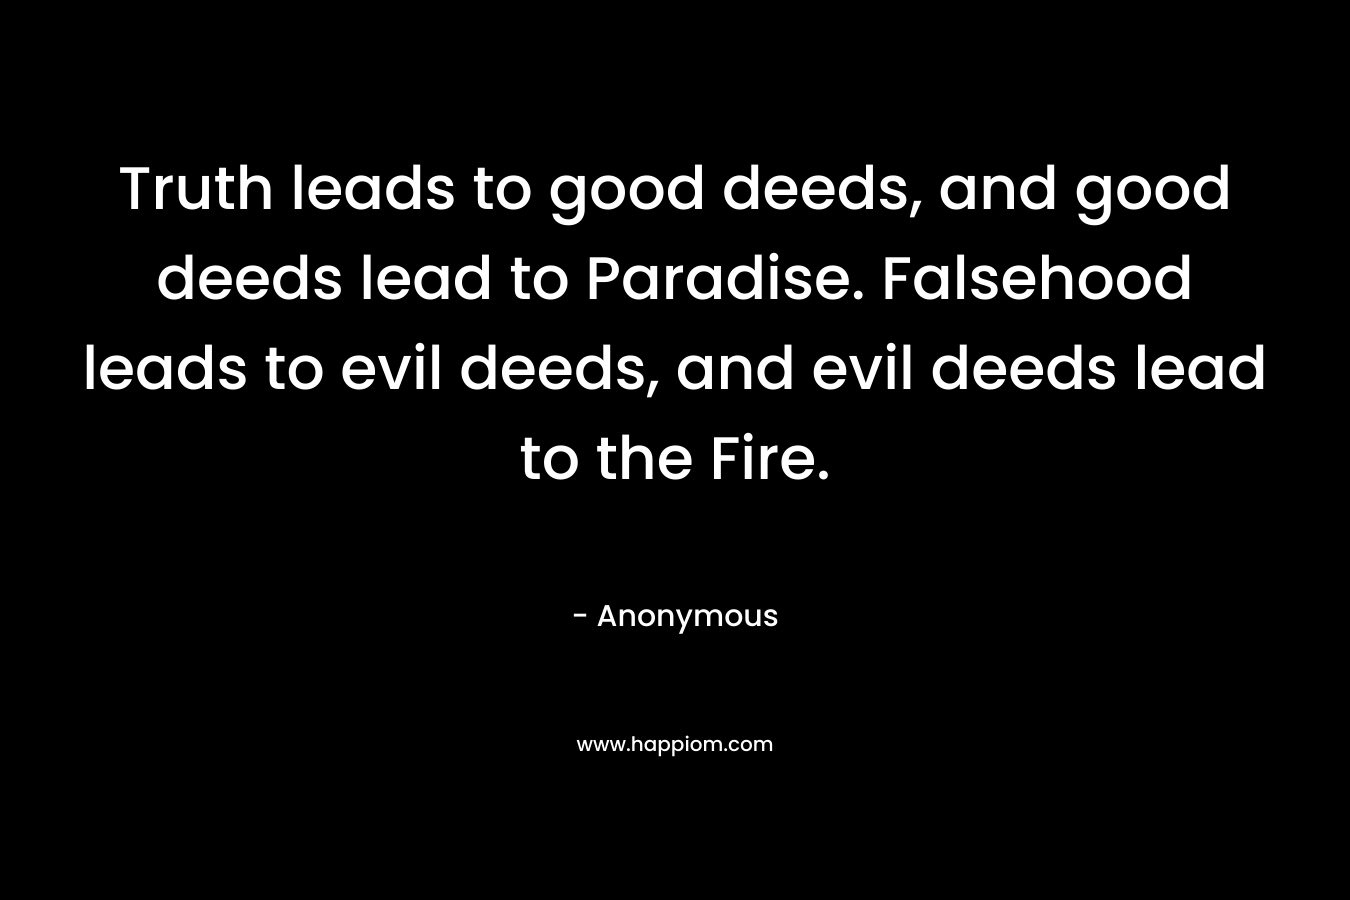 Truth leads to good deeds, and good deeds lead to Paradise. Falsehood leads to evil deeds, and evil deeds lead to the Fire.